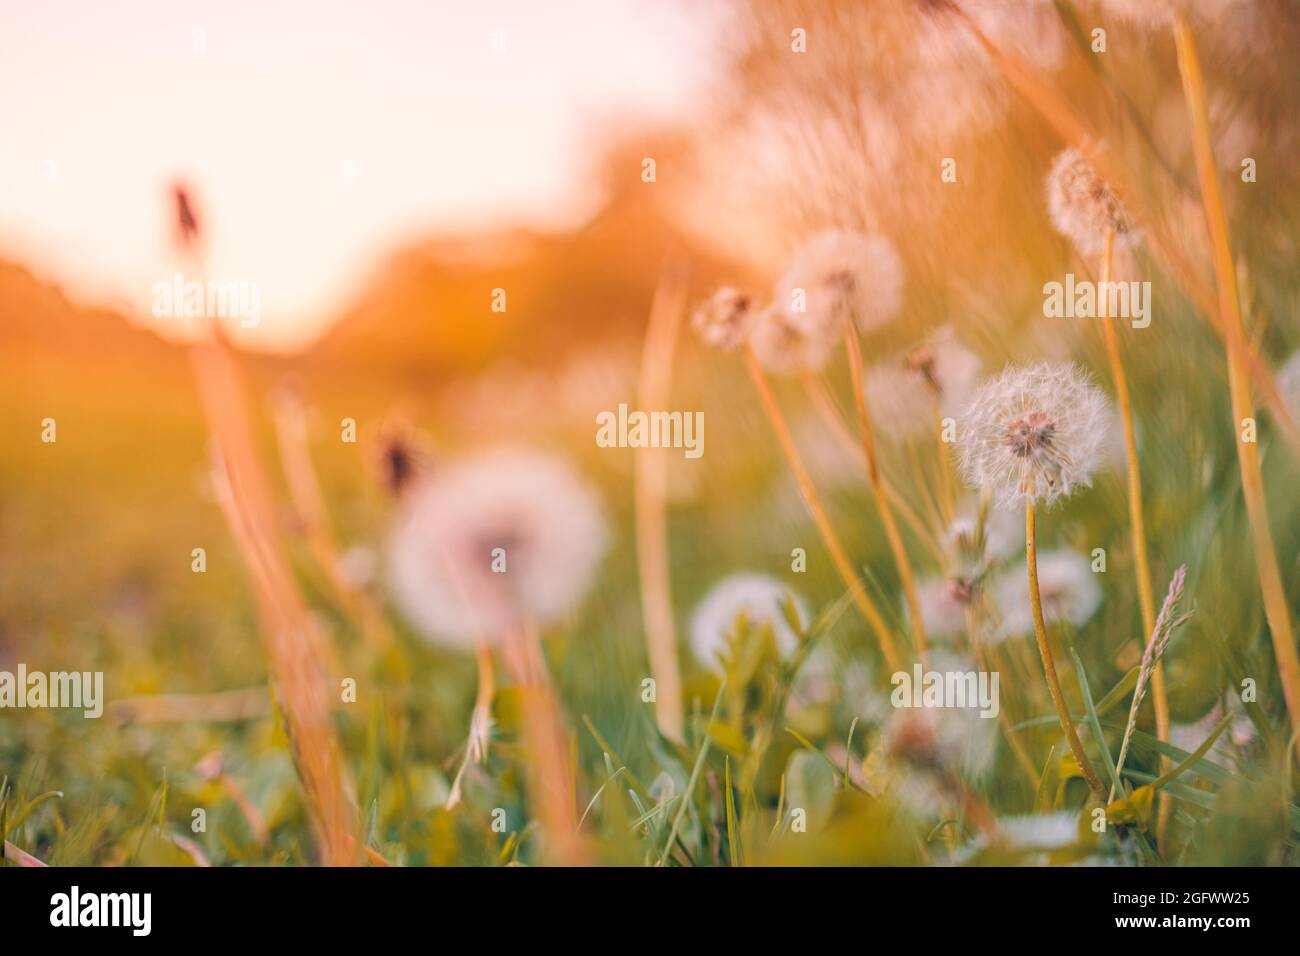 Green summer meadow with dandelions at sunset. Nature background, peaceful bright field landscape, closeup floral details. Idyllic natural plants Stock Photo